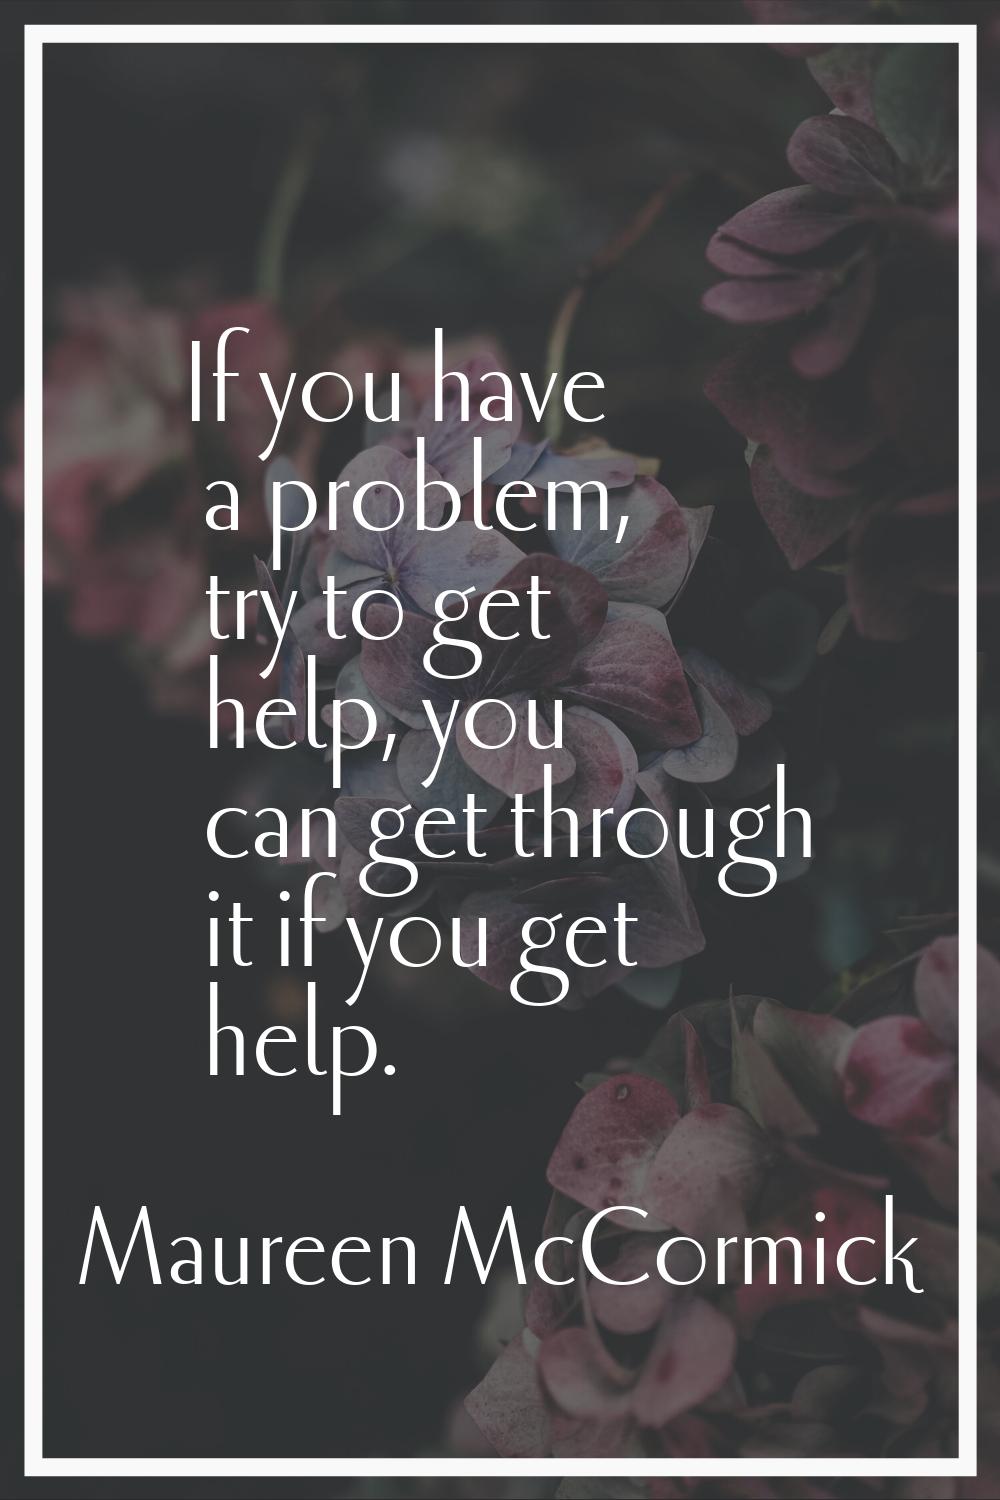 If you have a problem, try to get help, you can get through it if you get help.